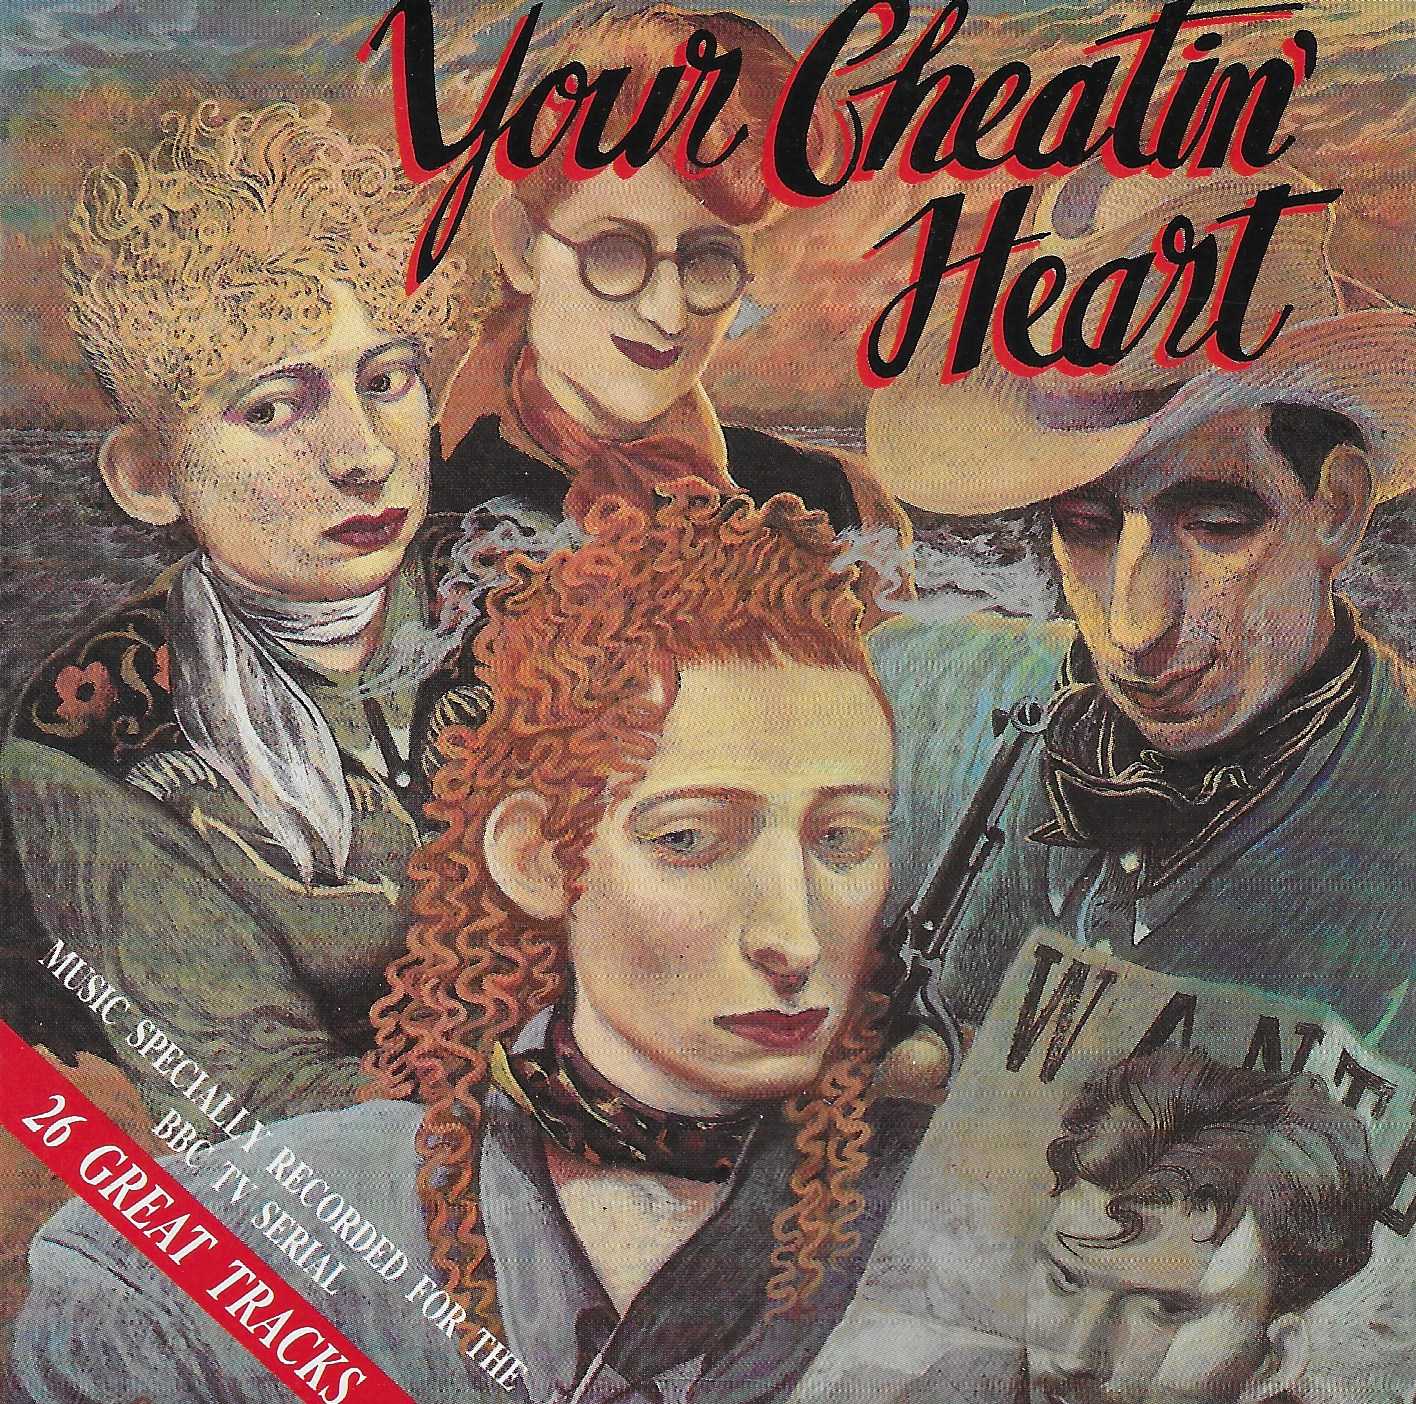 Picture of Your cheatin' heart by artist Various from the BBC cds - Records and Tapes library